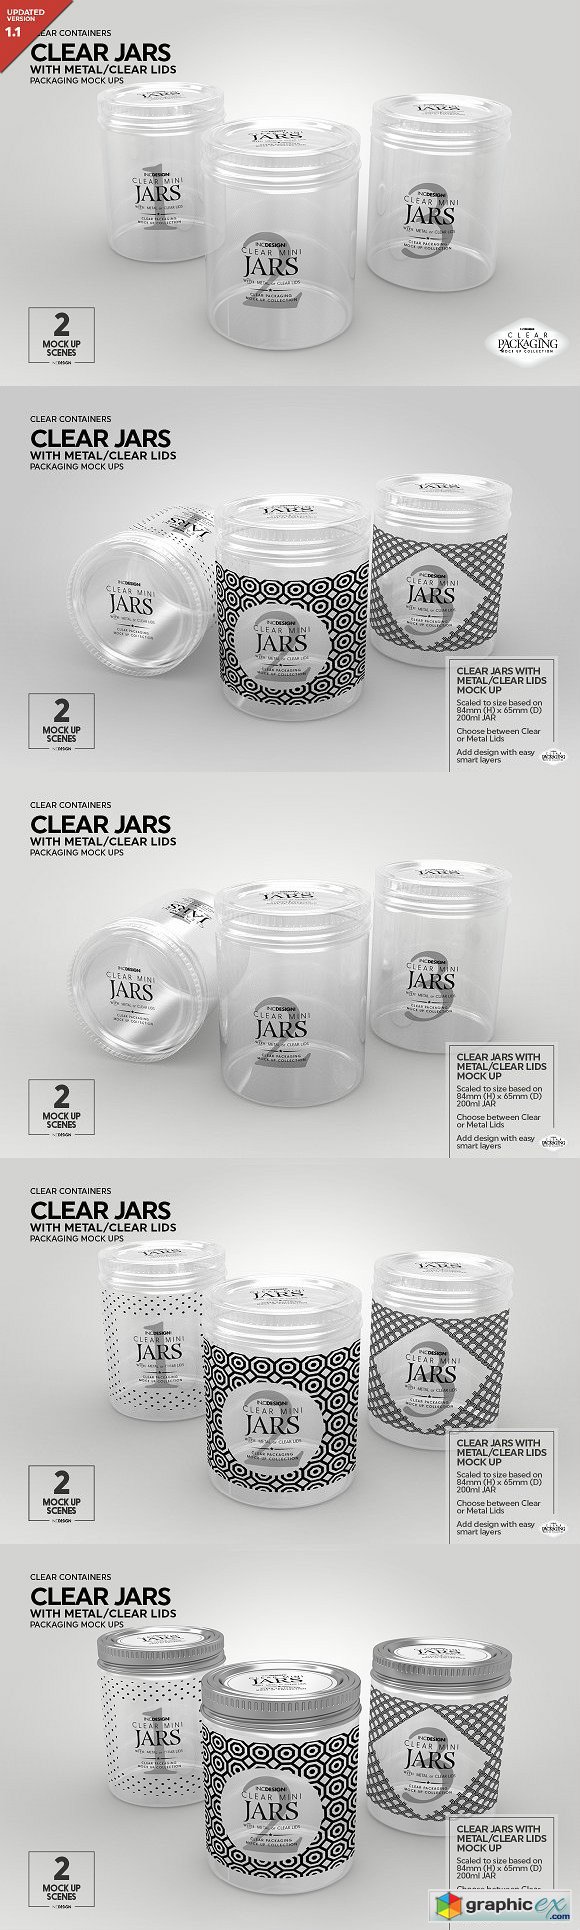 Clear Jars with Metal Lids